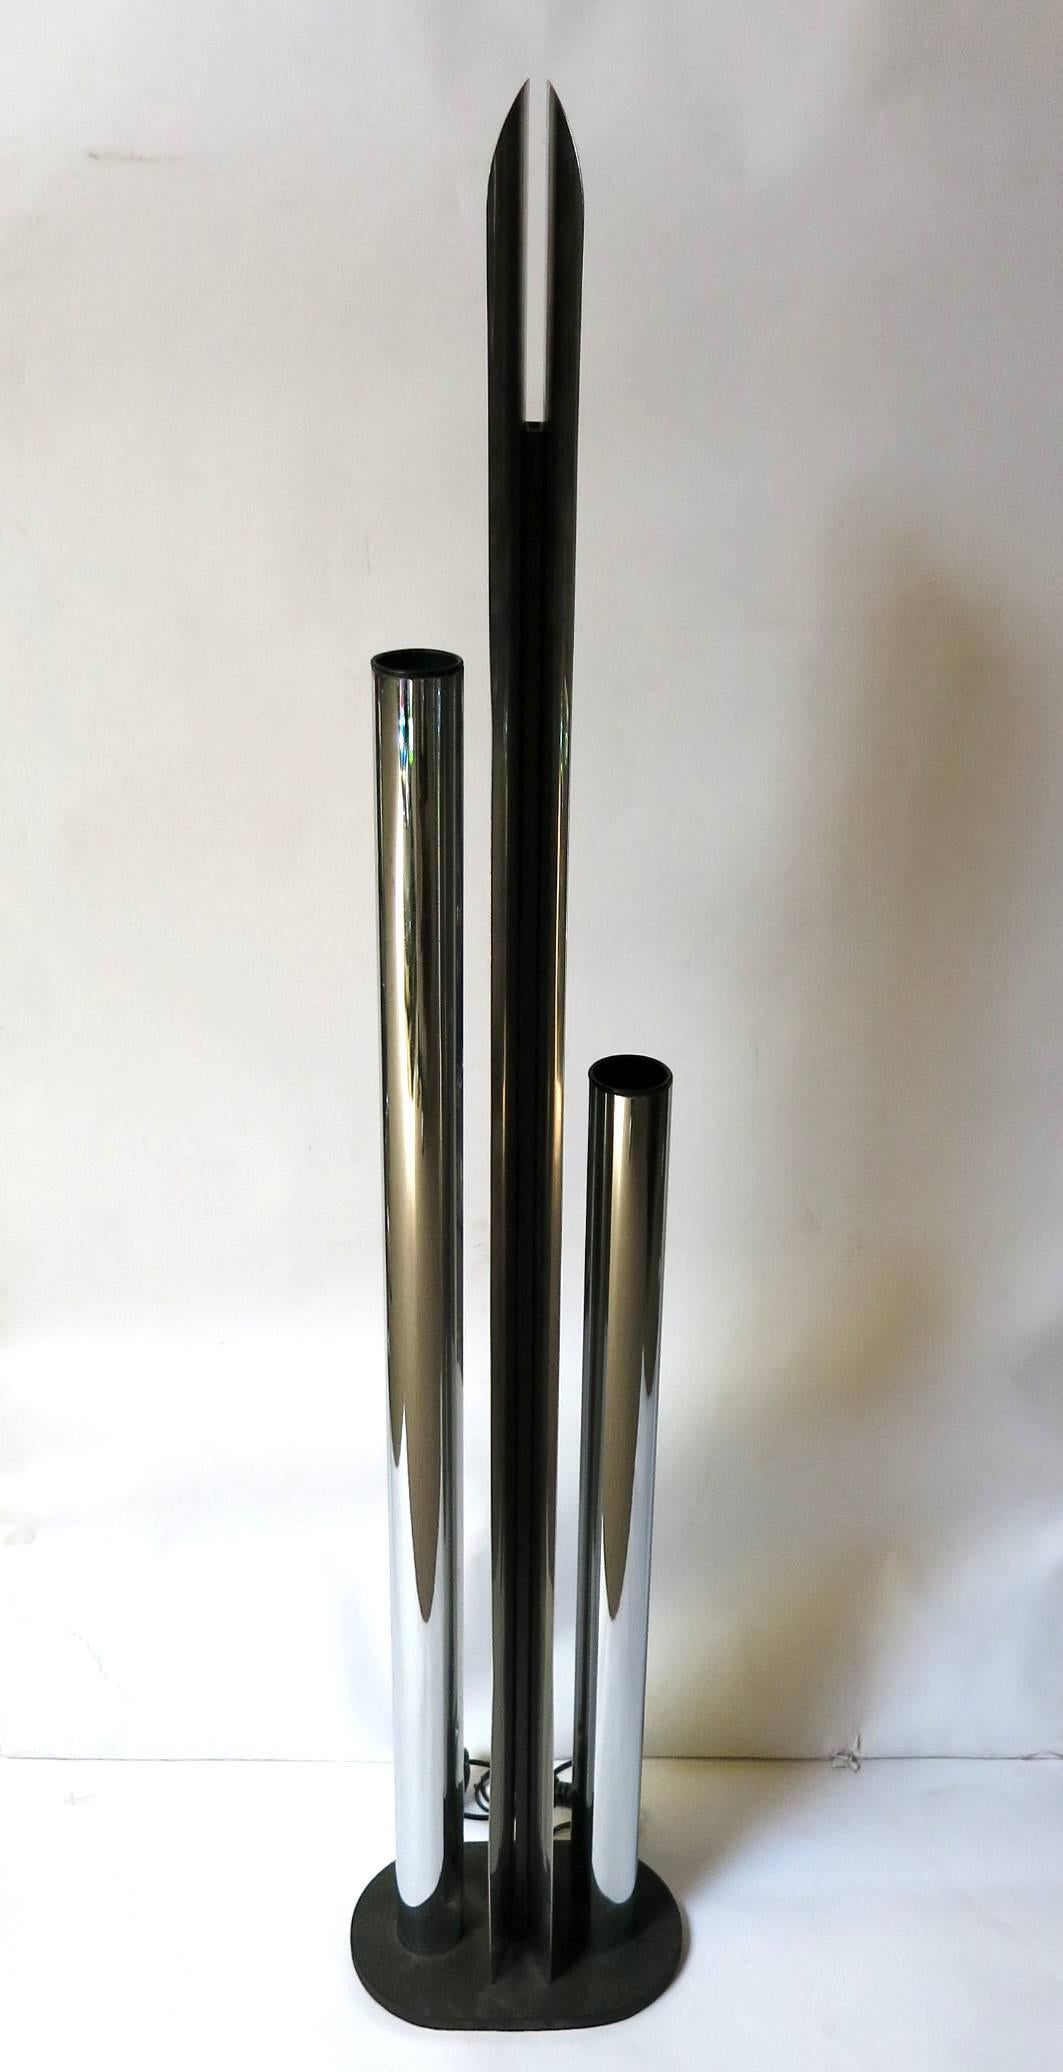 Vintage Italian mid-century chrome tubular floor lamp by Gaetano Sciolari / Made in Italy circa 1960’s
2 lights / E26 or E27 type / max 60W each
Height: 60 inches / Diameter: 12 inches
1 in stock in Palm Springs ON FINAL CLEARANCE SALE for